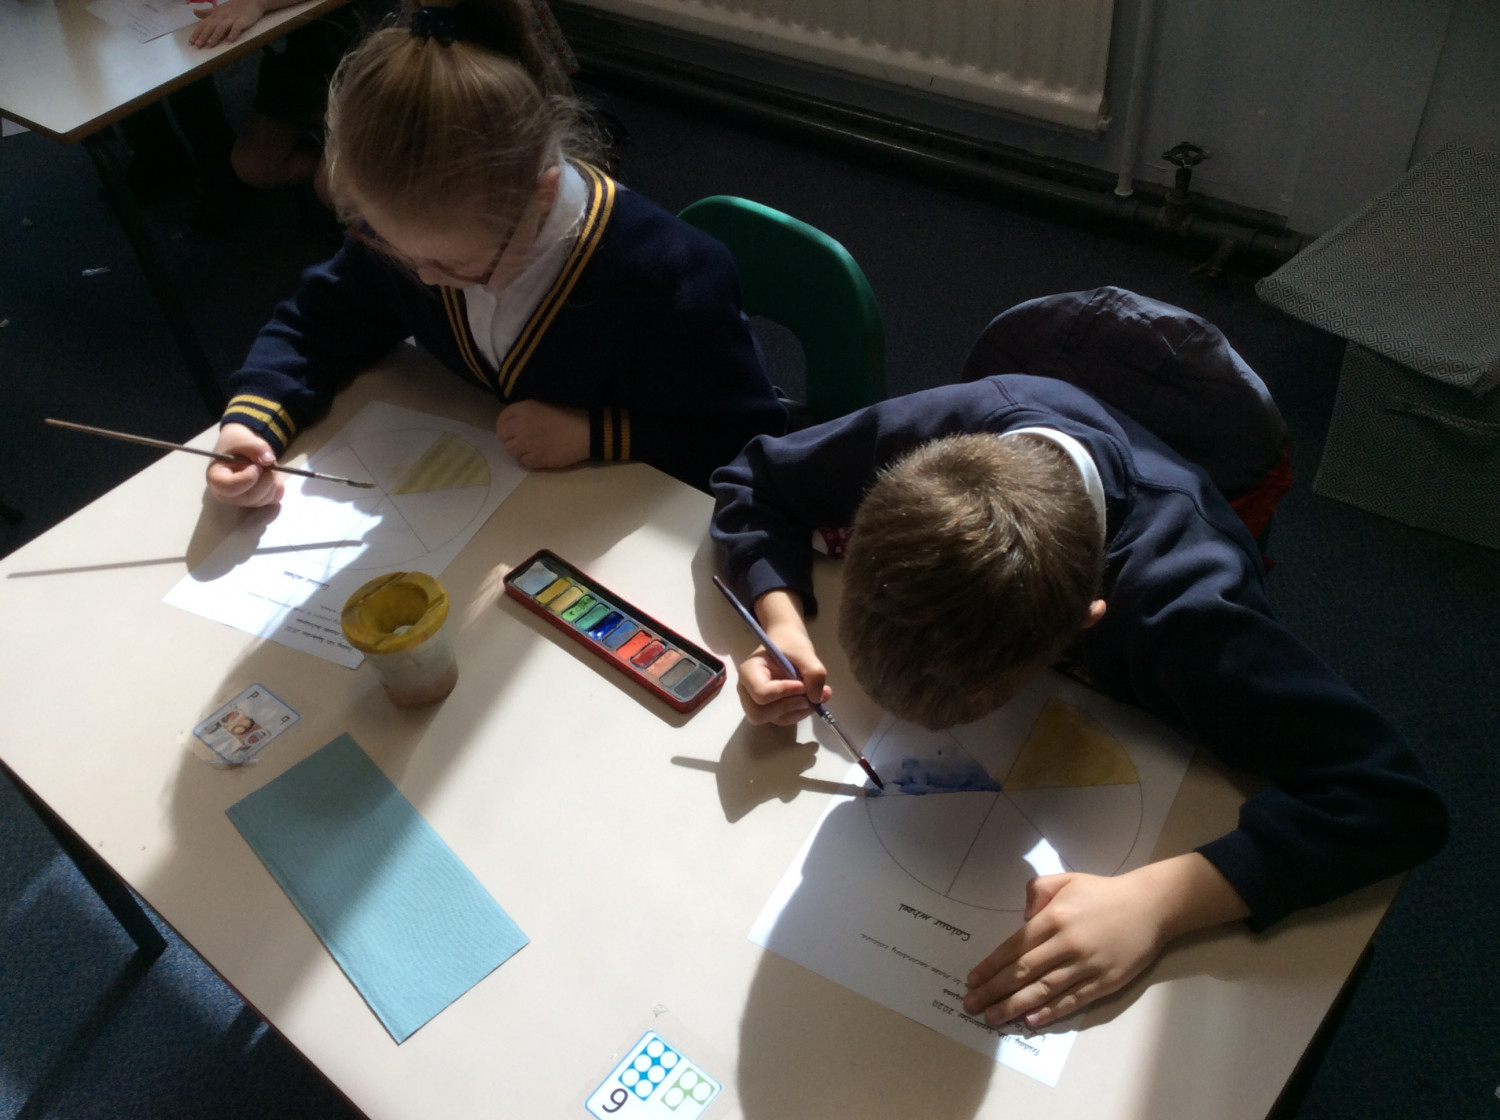 2J painting colour wheels in art